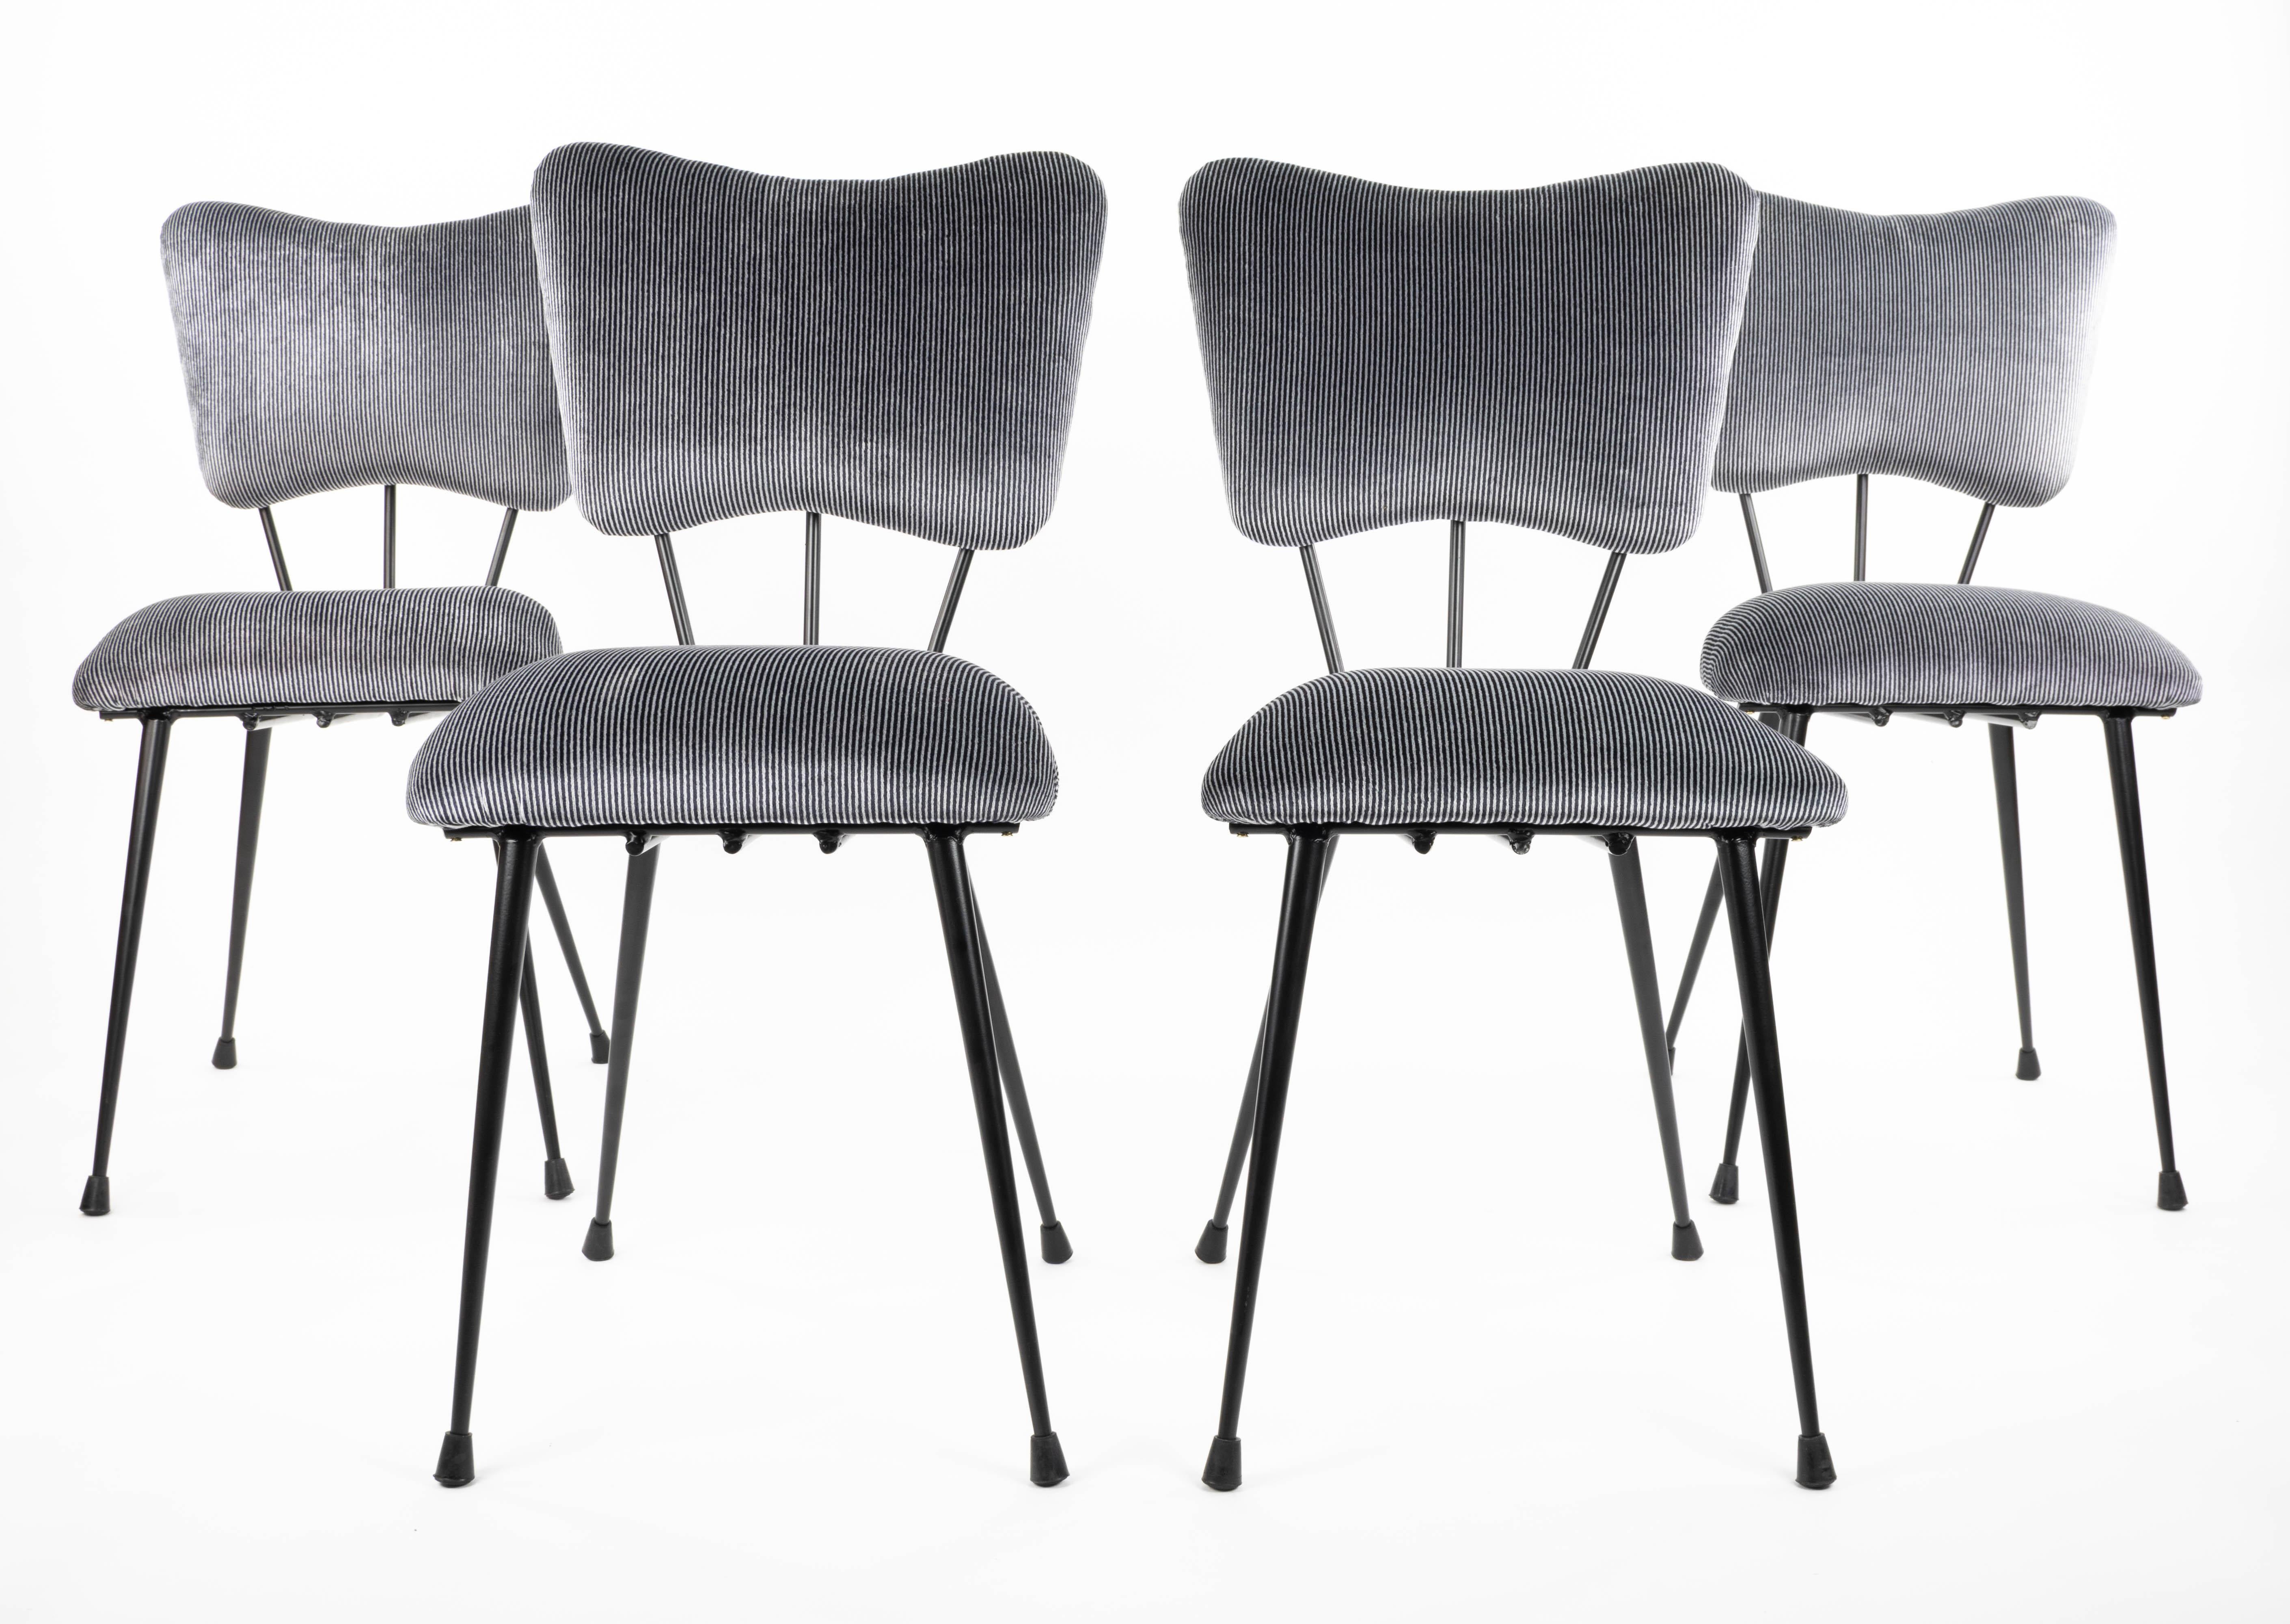 Set of four chairs of French origin, made in the 1950s. Metal structure lacquered in black, wooden frames padded and upholstered in black and silver striped polyester.
Stylized shapes and needle legs.
Measurements:
Total height 85 cm
High seat